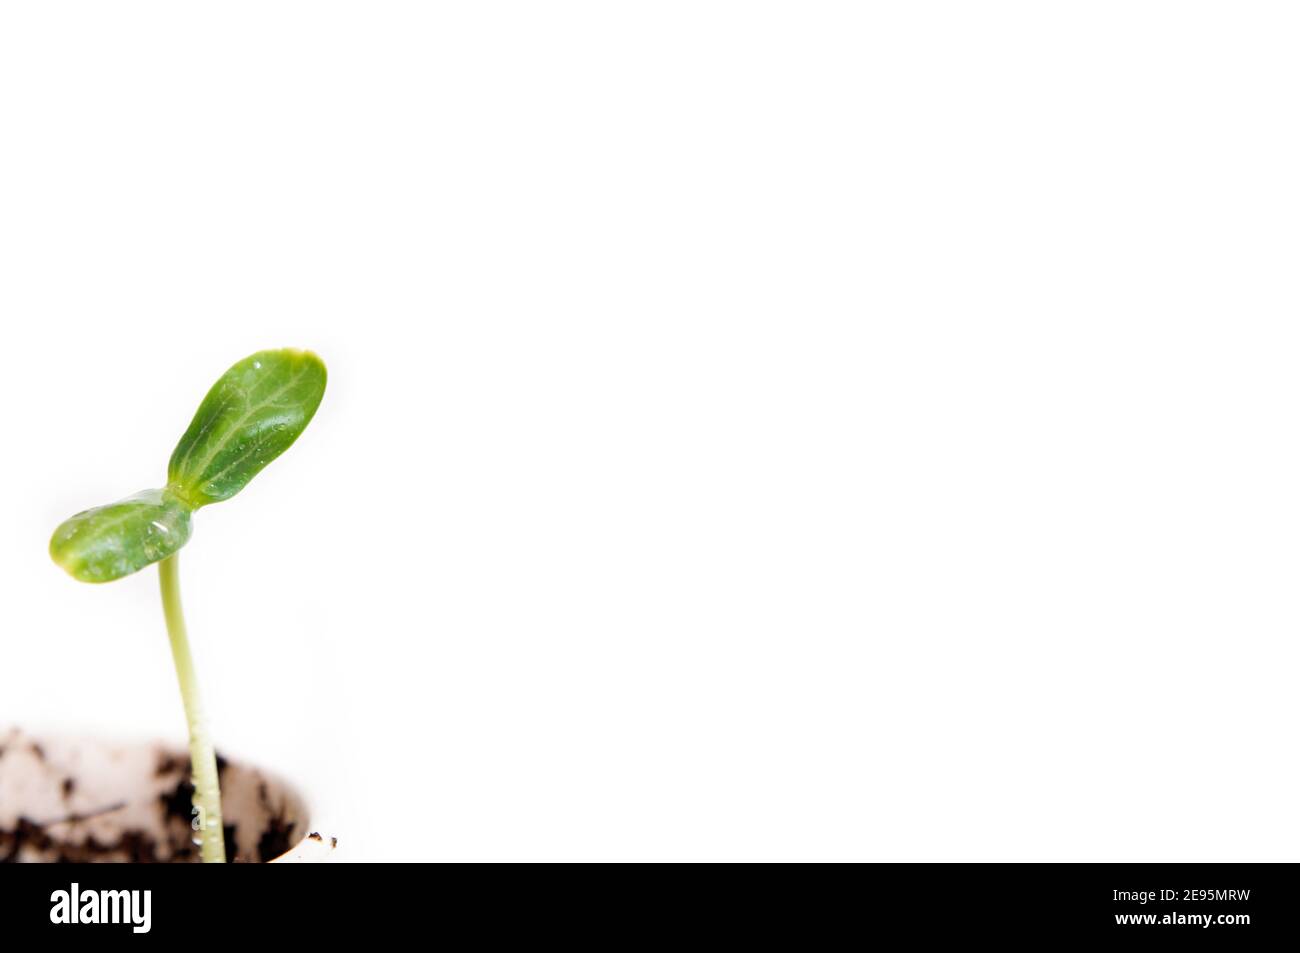 green baby plant. Business growth concept, personality. Stock Photo